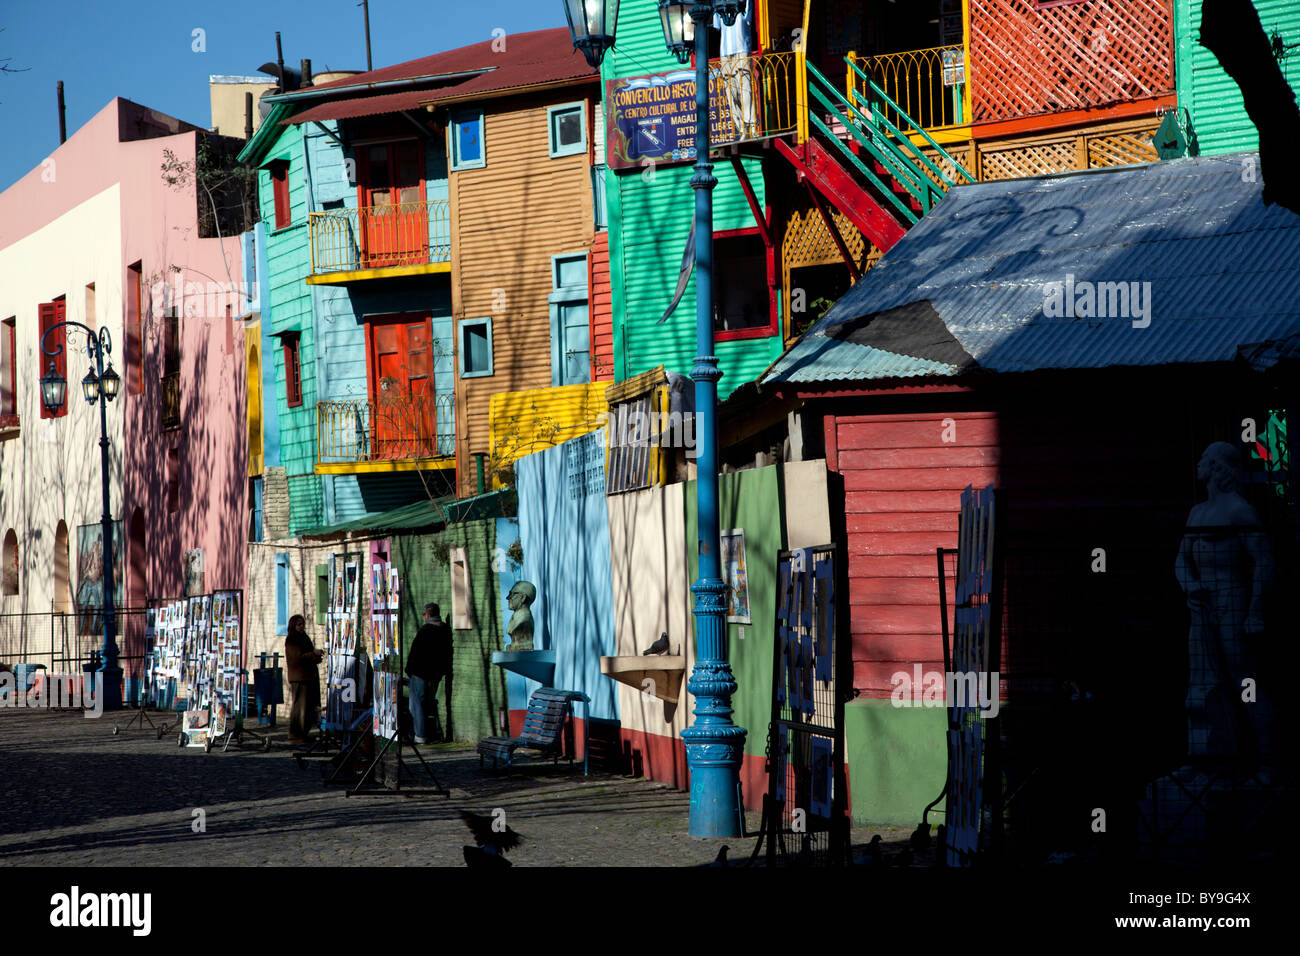 The colorful streets of La Boca, a working class suburb of Buenos Aires, Argentina famed for tango and Boca Juniors futbol. Stock Photo